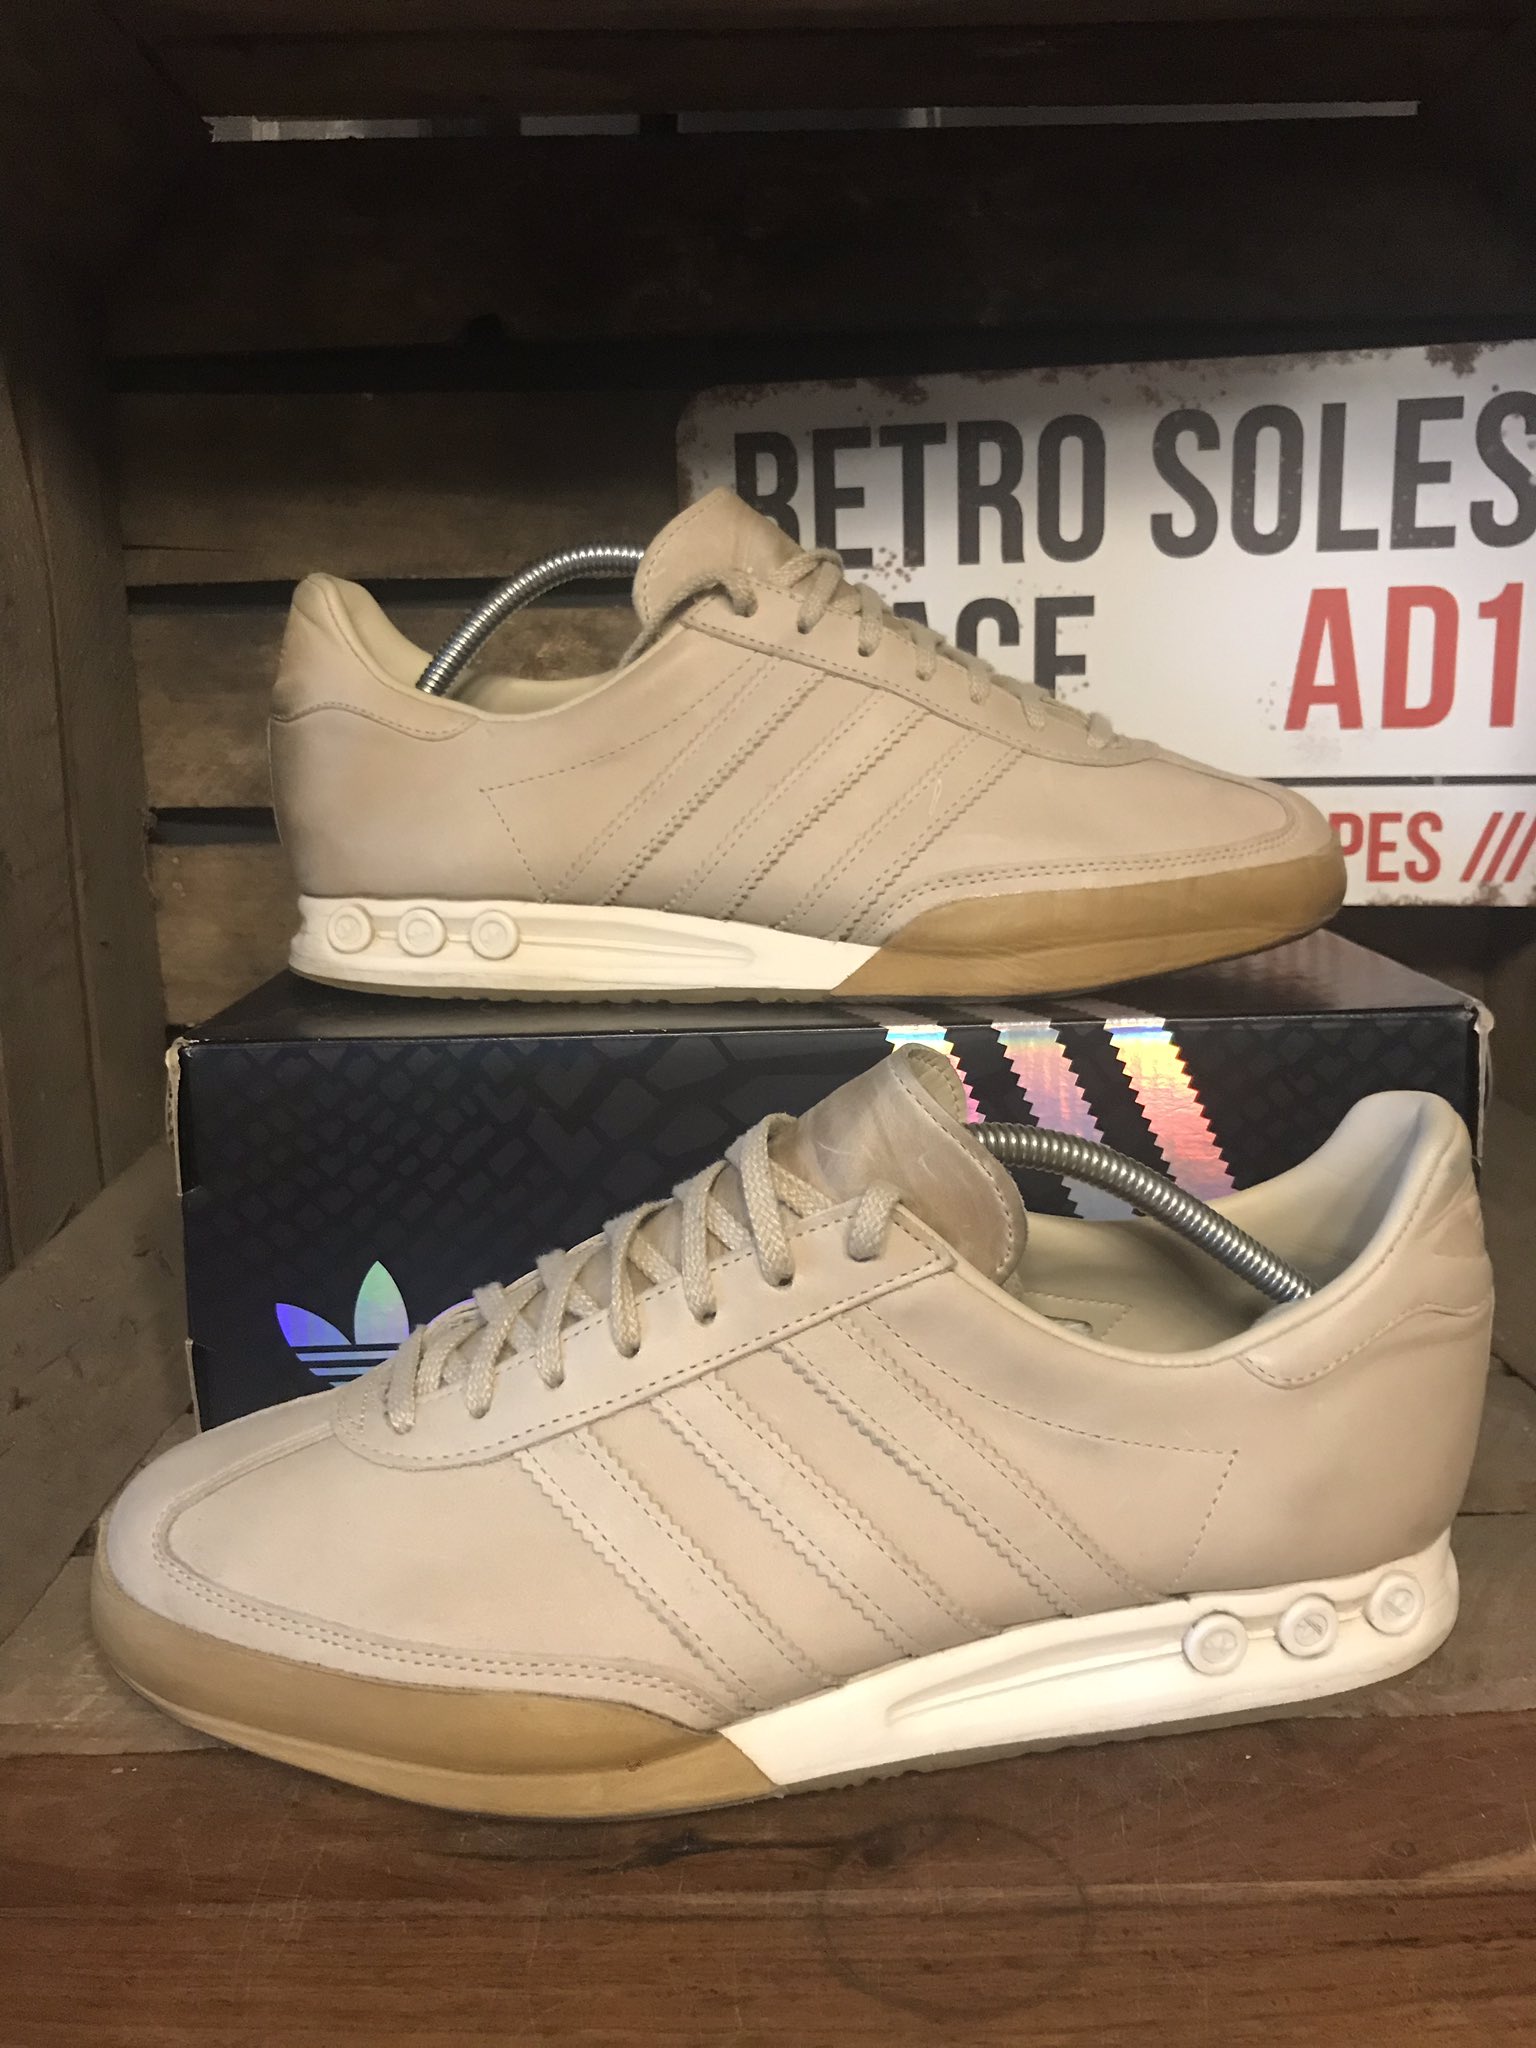 Retro Soles on Twitter: "FOR SALE:- #kegler #super Tournament Edition 2014 UK 9 Cream Leather Need Leather clean OG Box £70 Delivered me if interested RT Appreciated /// #adidasoriginals 👍